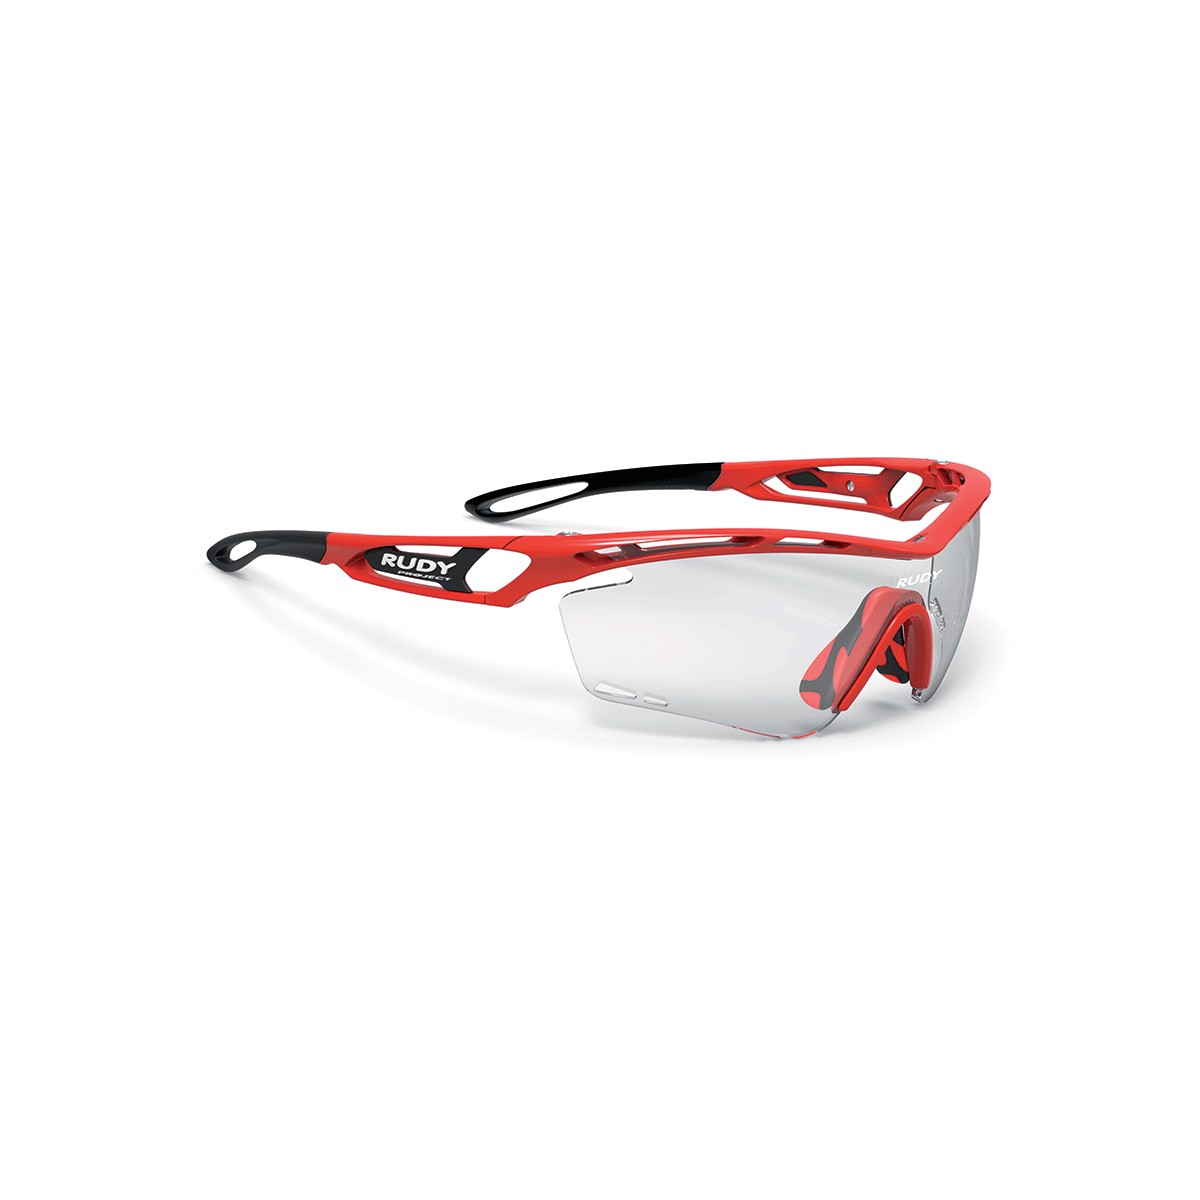 Tralyx Fire Red Gloss ImpactX 2 Black Photochromic Rudy Project Sunglasses